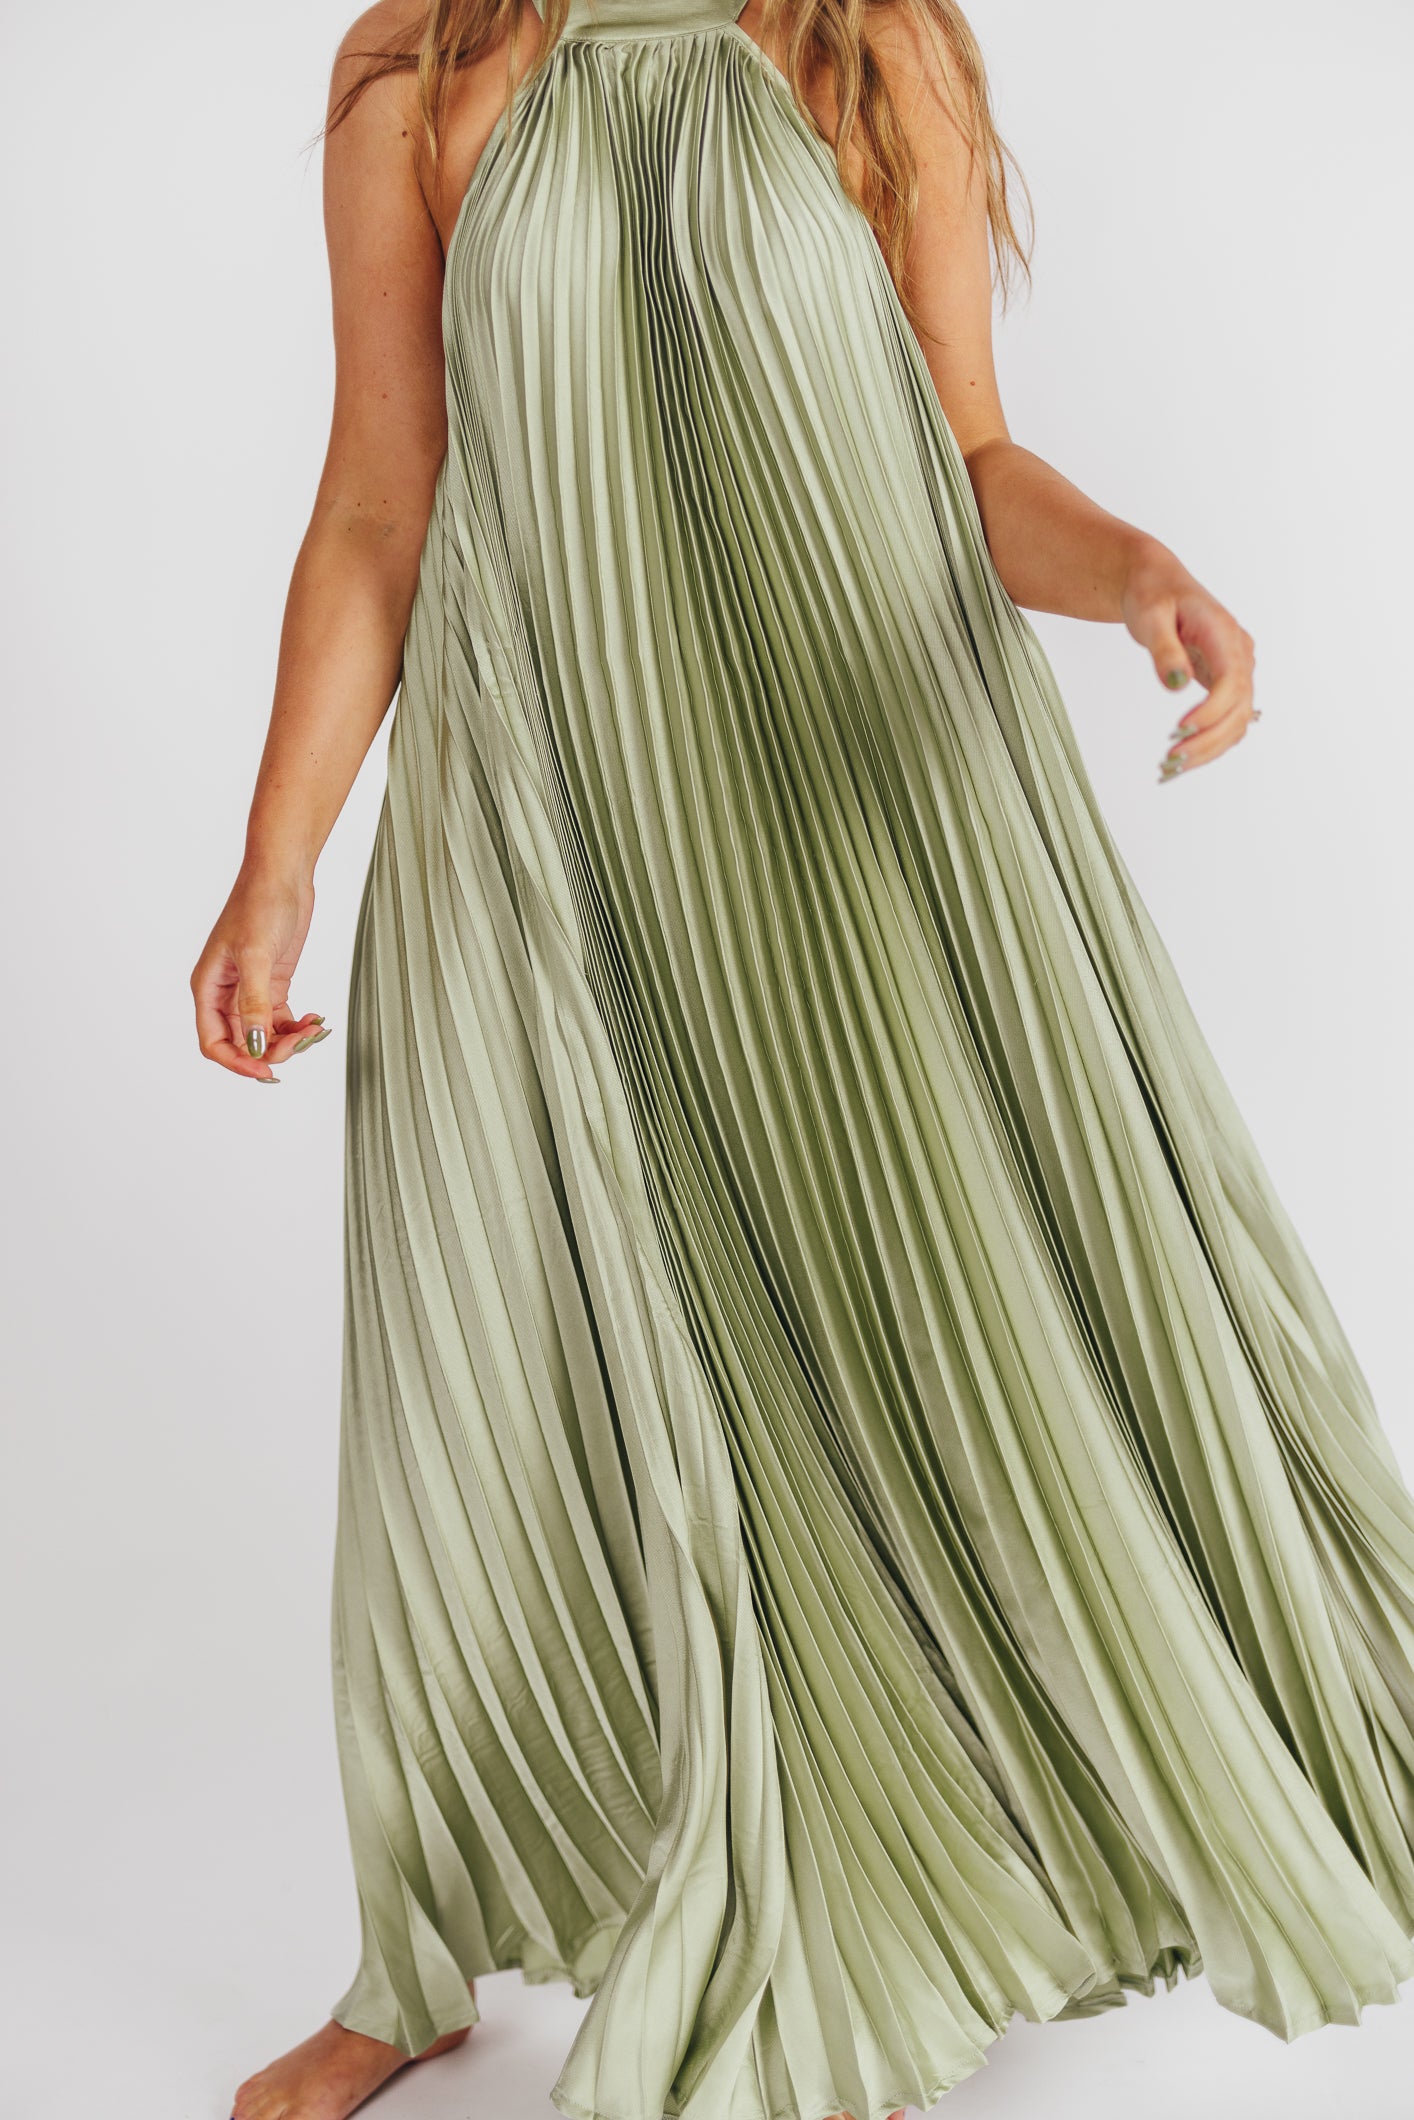 Maren Pleated Halter Maxi Dress in Sage - Bump Friendly (S-XL) Almost Sold Out!